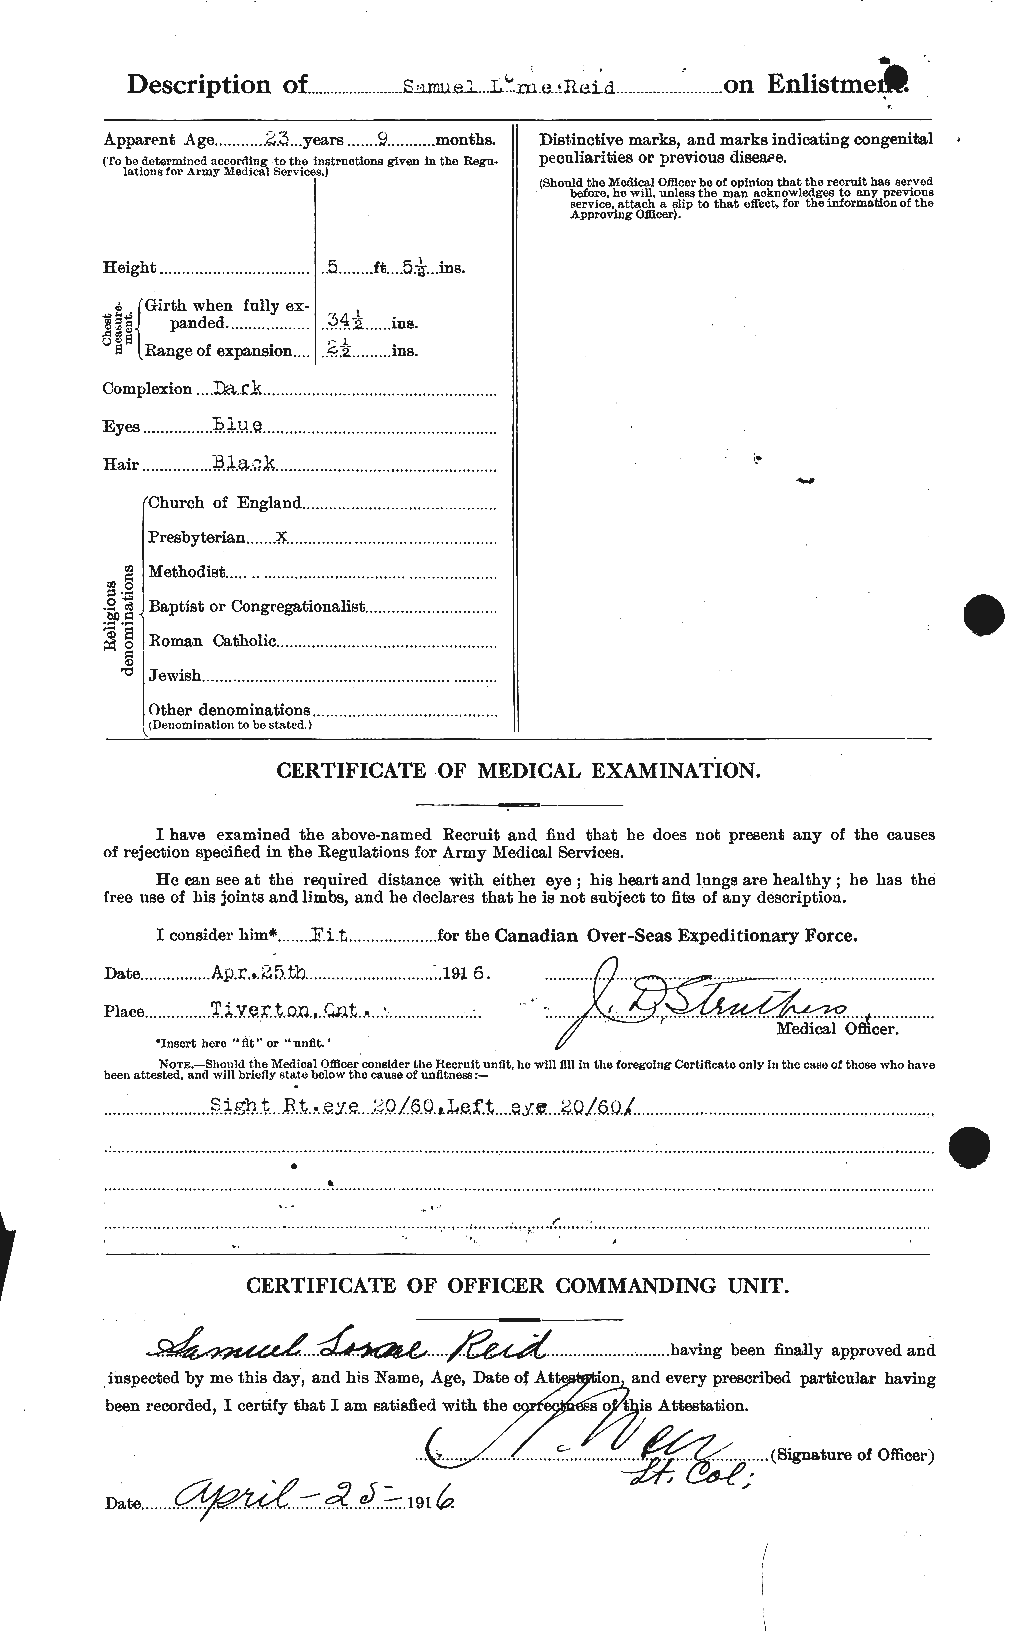 Personnel Records of the First World War - CEF 601951b